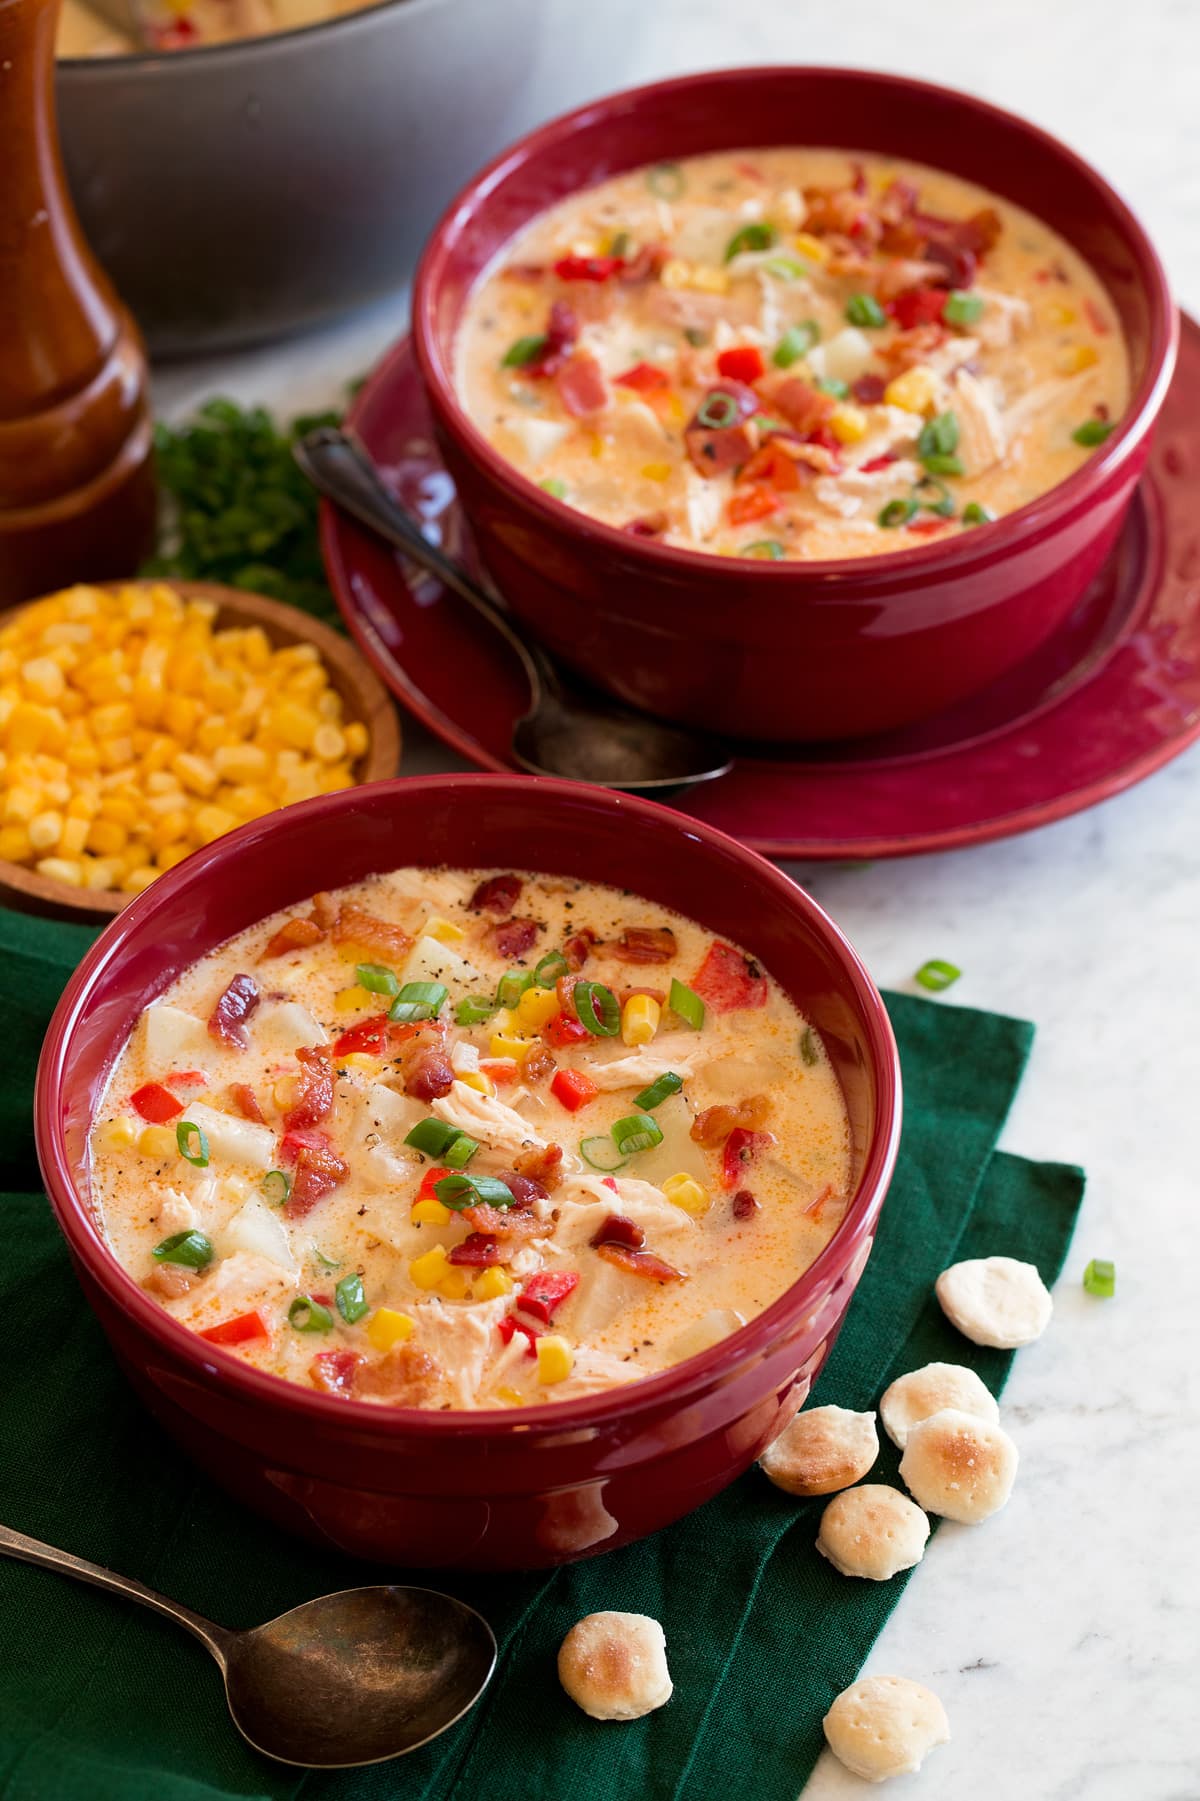 Two servings of chicken corn chowder in red bowls sitting over a green cloth on a marble surface.